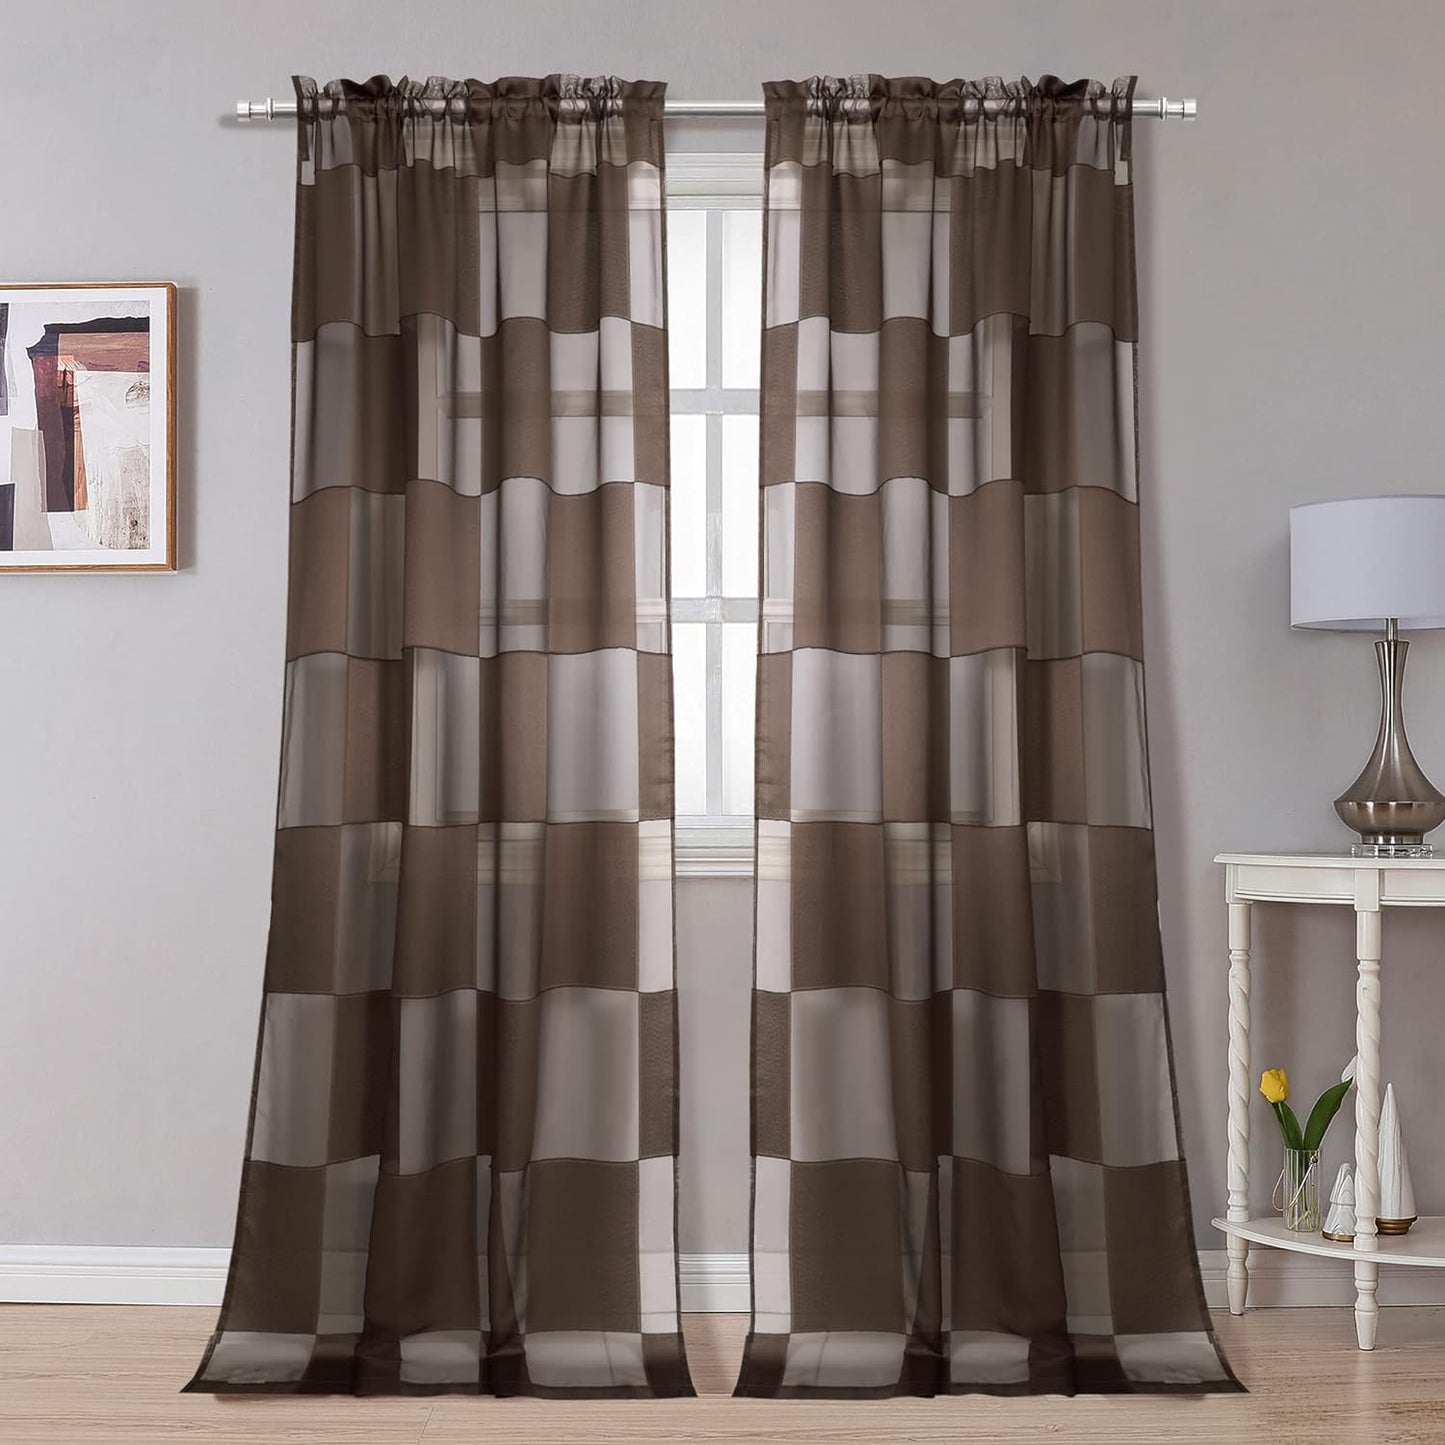 OVZME Sage Green Sheer Bedroom Curtains 84 Inch Length 2 Panels Set, Dual Rod Pocket Clip Checkered Window Curtains for Living Room, Light Filtering & Privacy Sheer Green Drapes, Each 42W X 84L  OVZME Brown 42W X 108L 